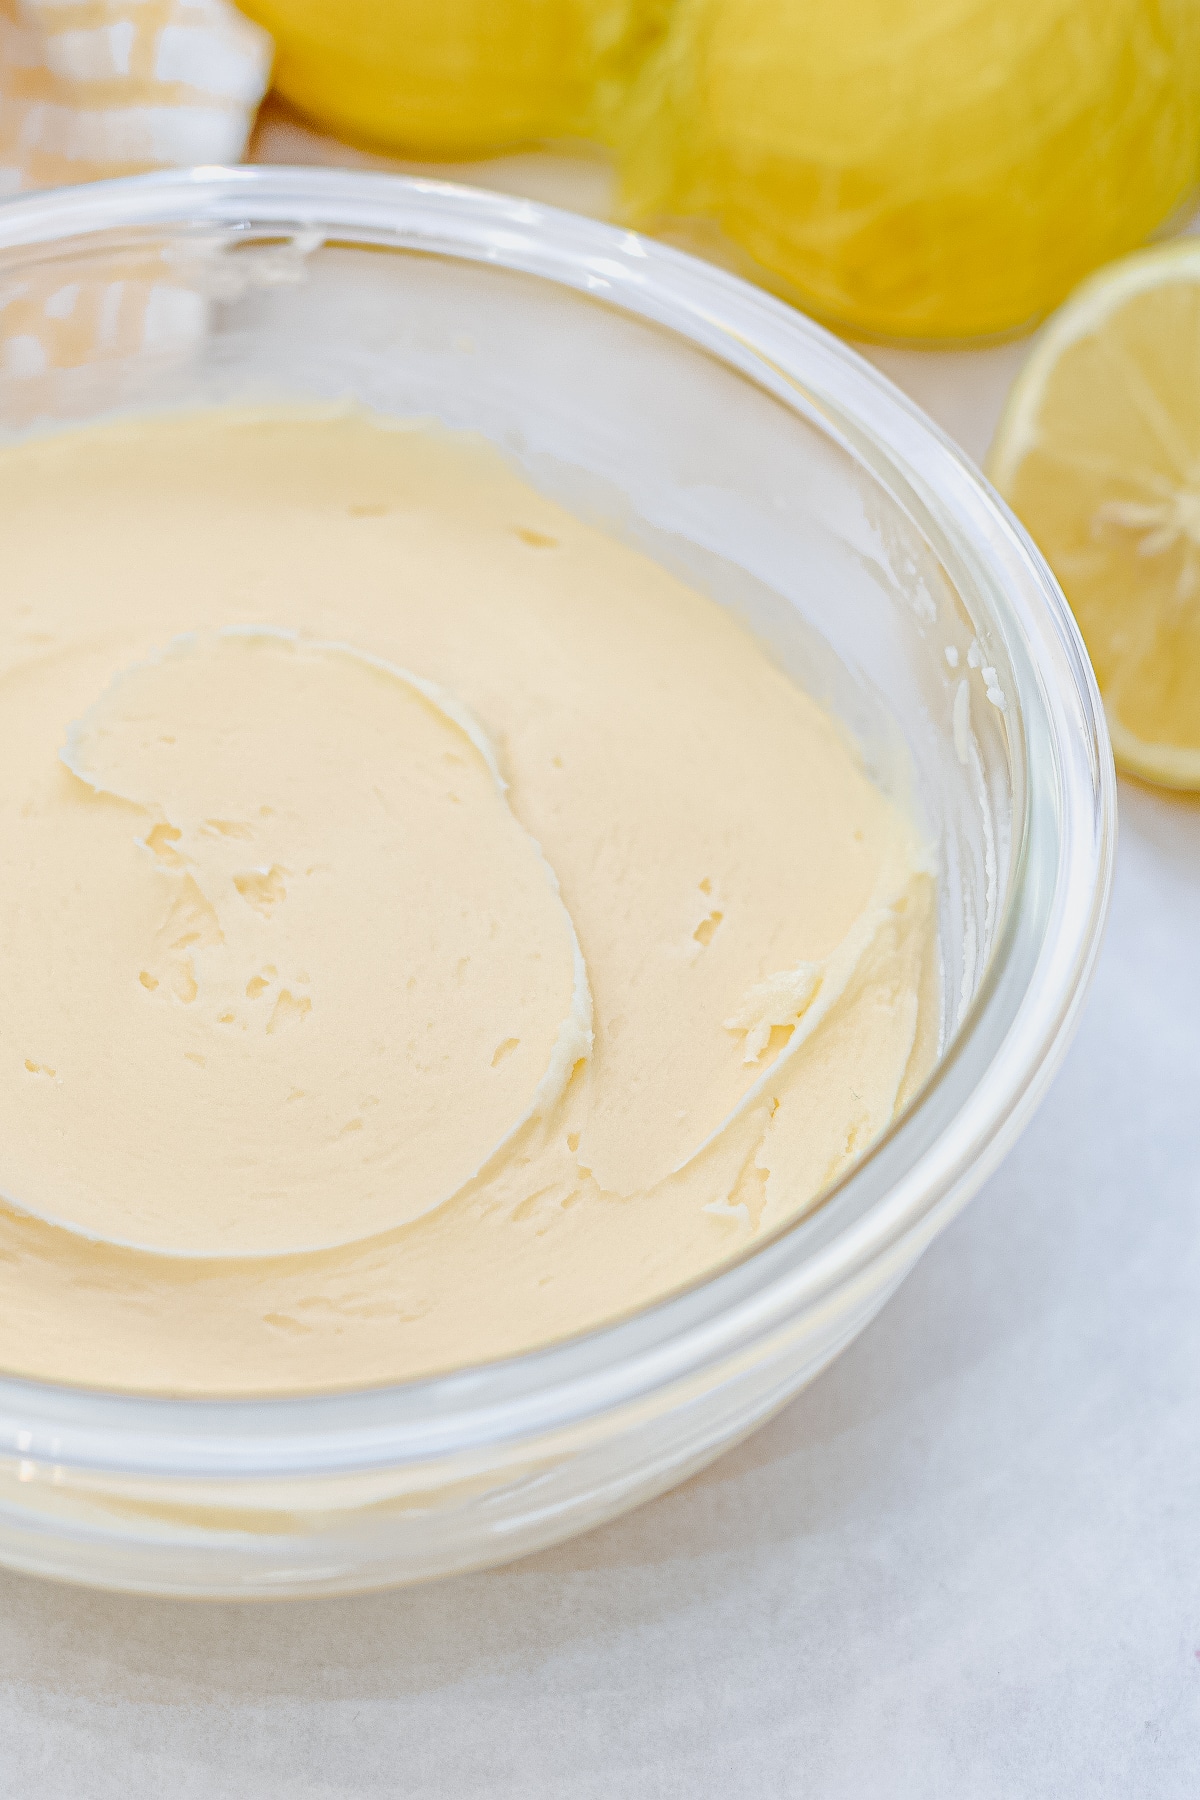 easy lemon buttercream frosting in a mixing bowl with lemons behind